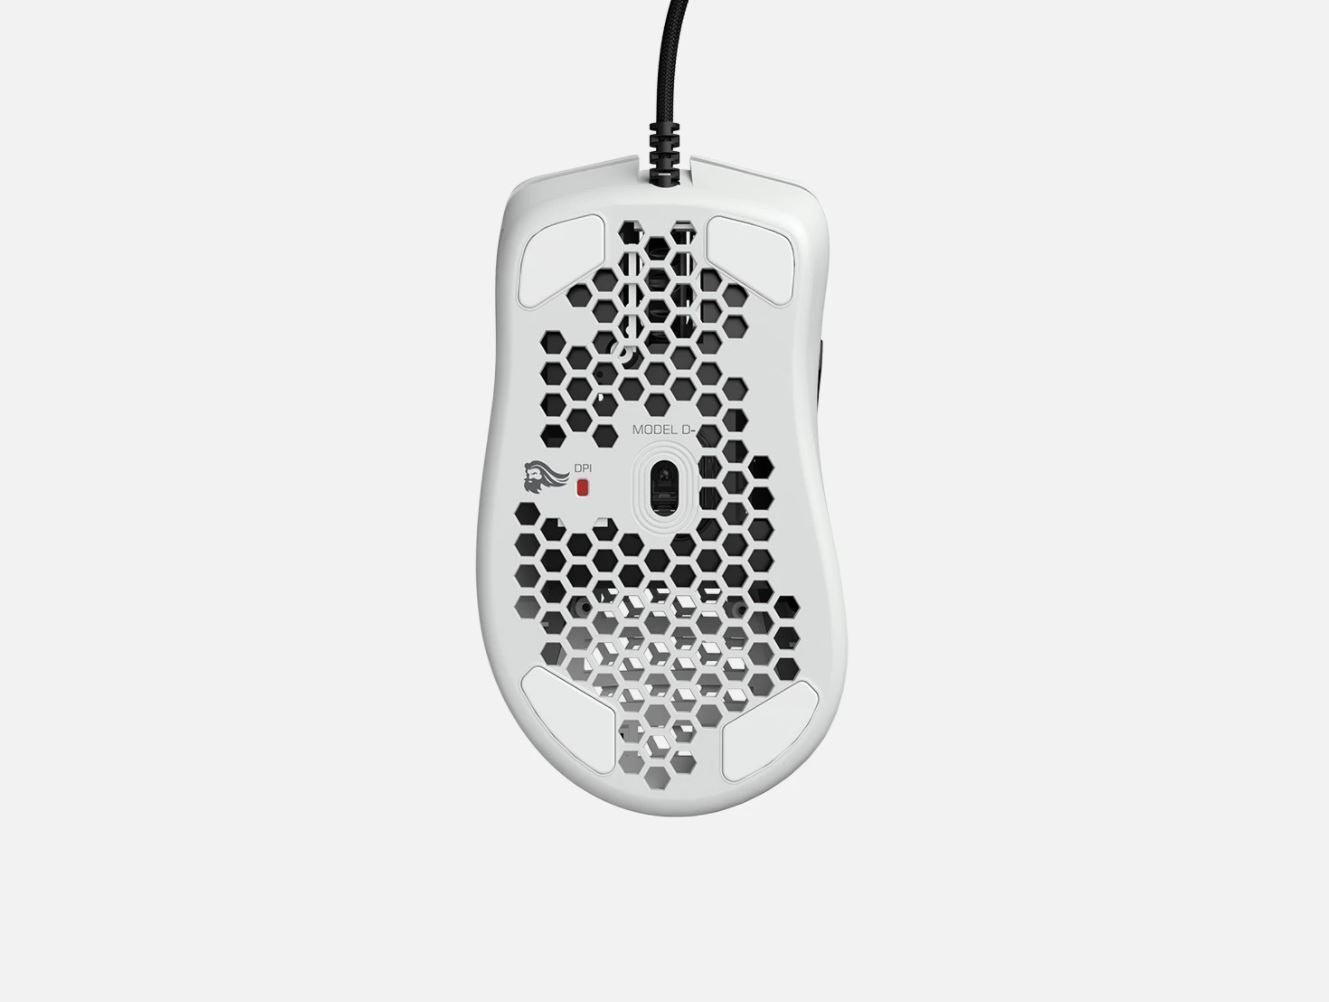 Glorious Gaming Mouse Model D Minus - Glossy White - BlinkQA